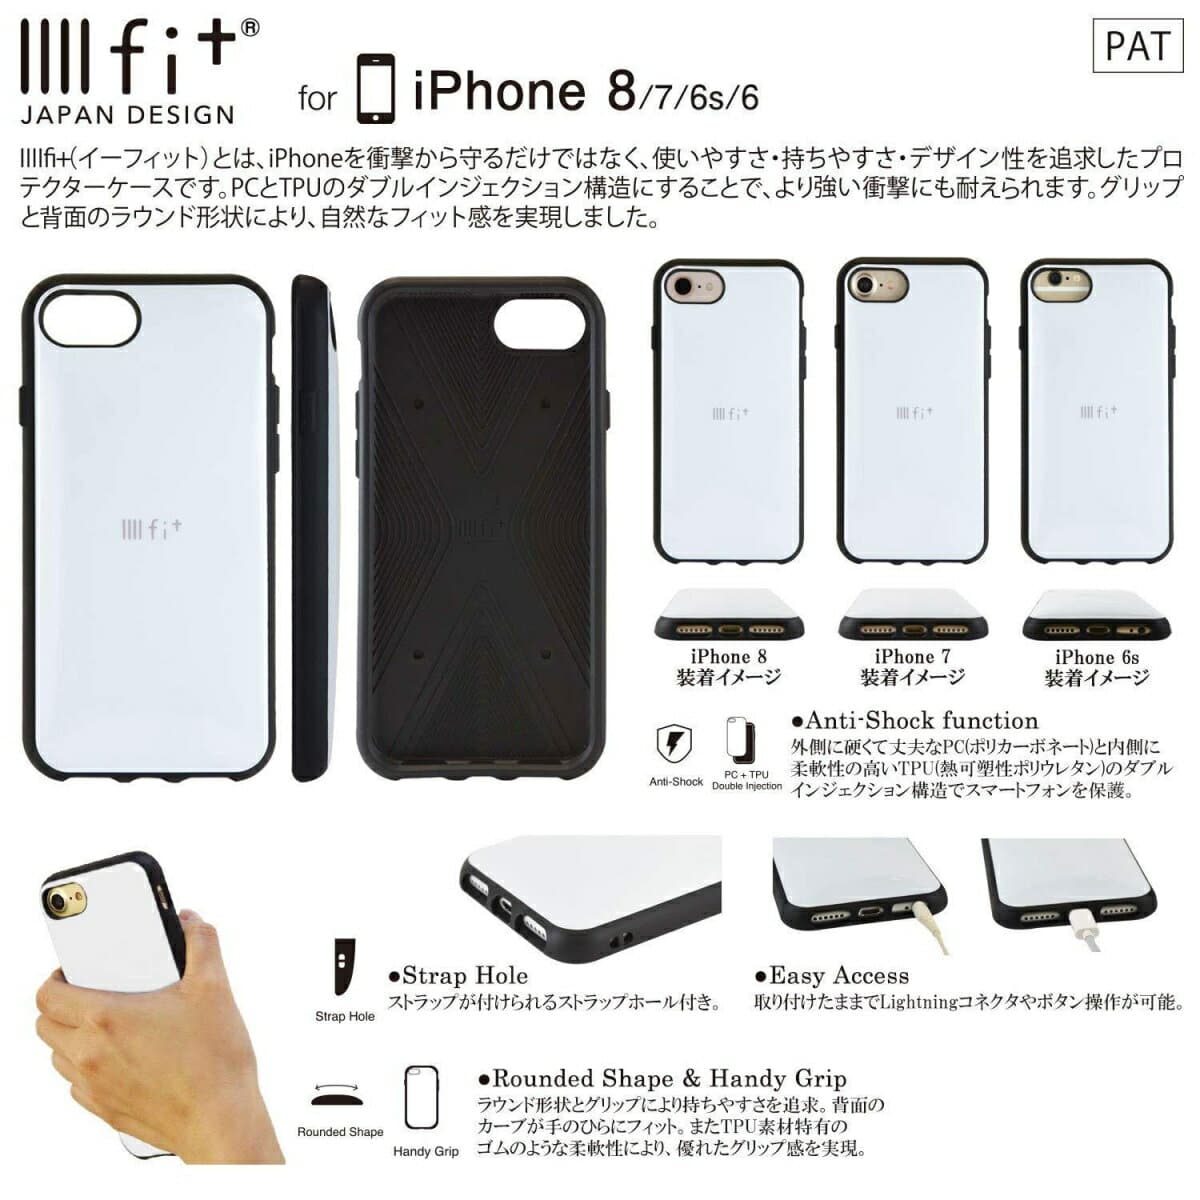 New Evangelion Iphone8 7 6s 6 Case E Fit Clear Iiiifit Clear Fancy Goods At Field Ev 147b Be Forward Store